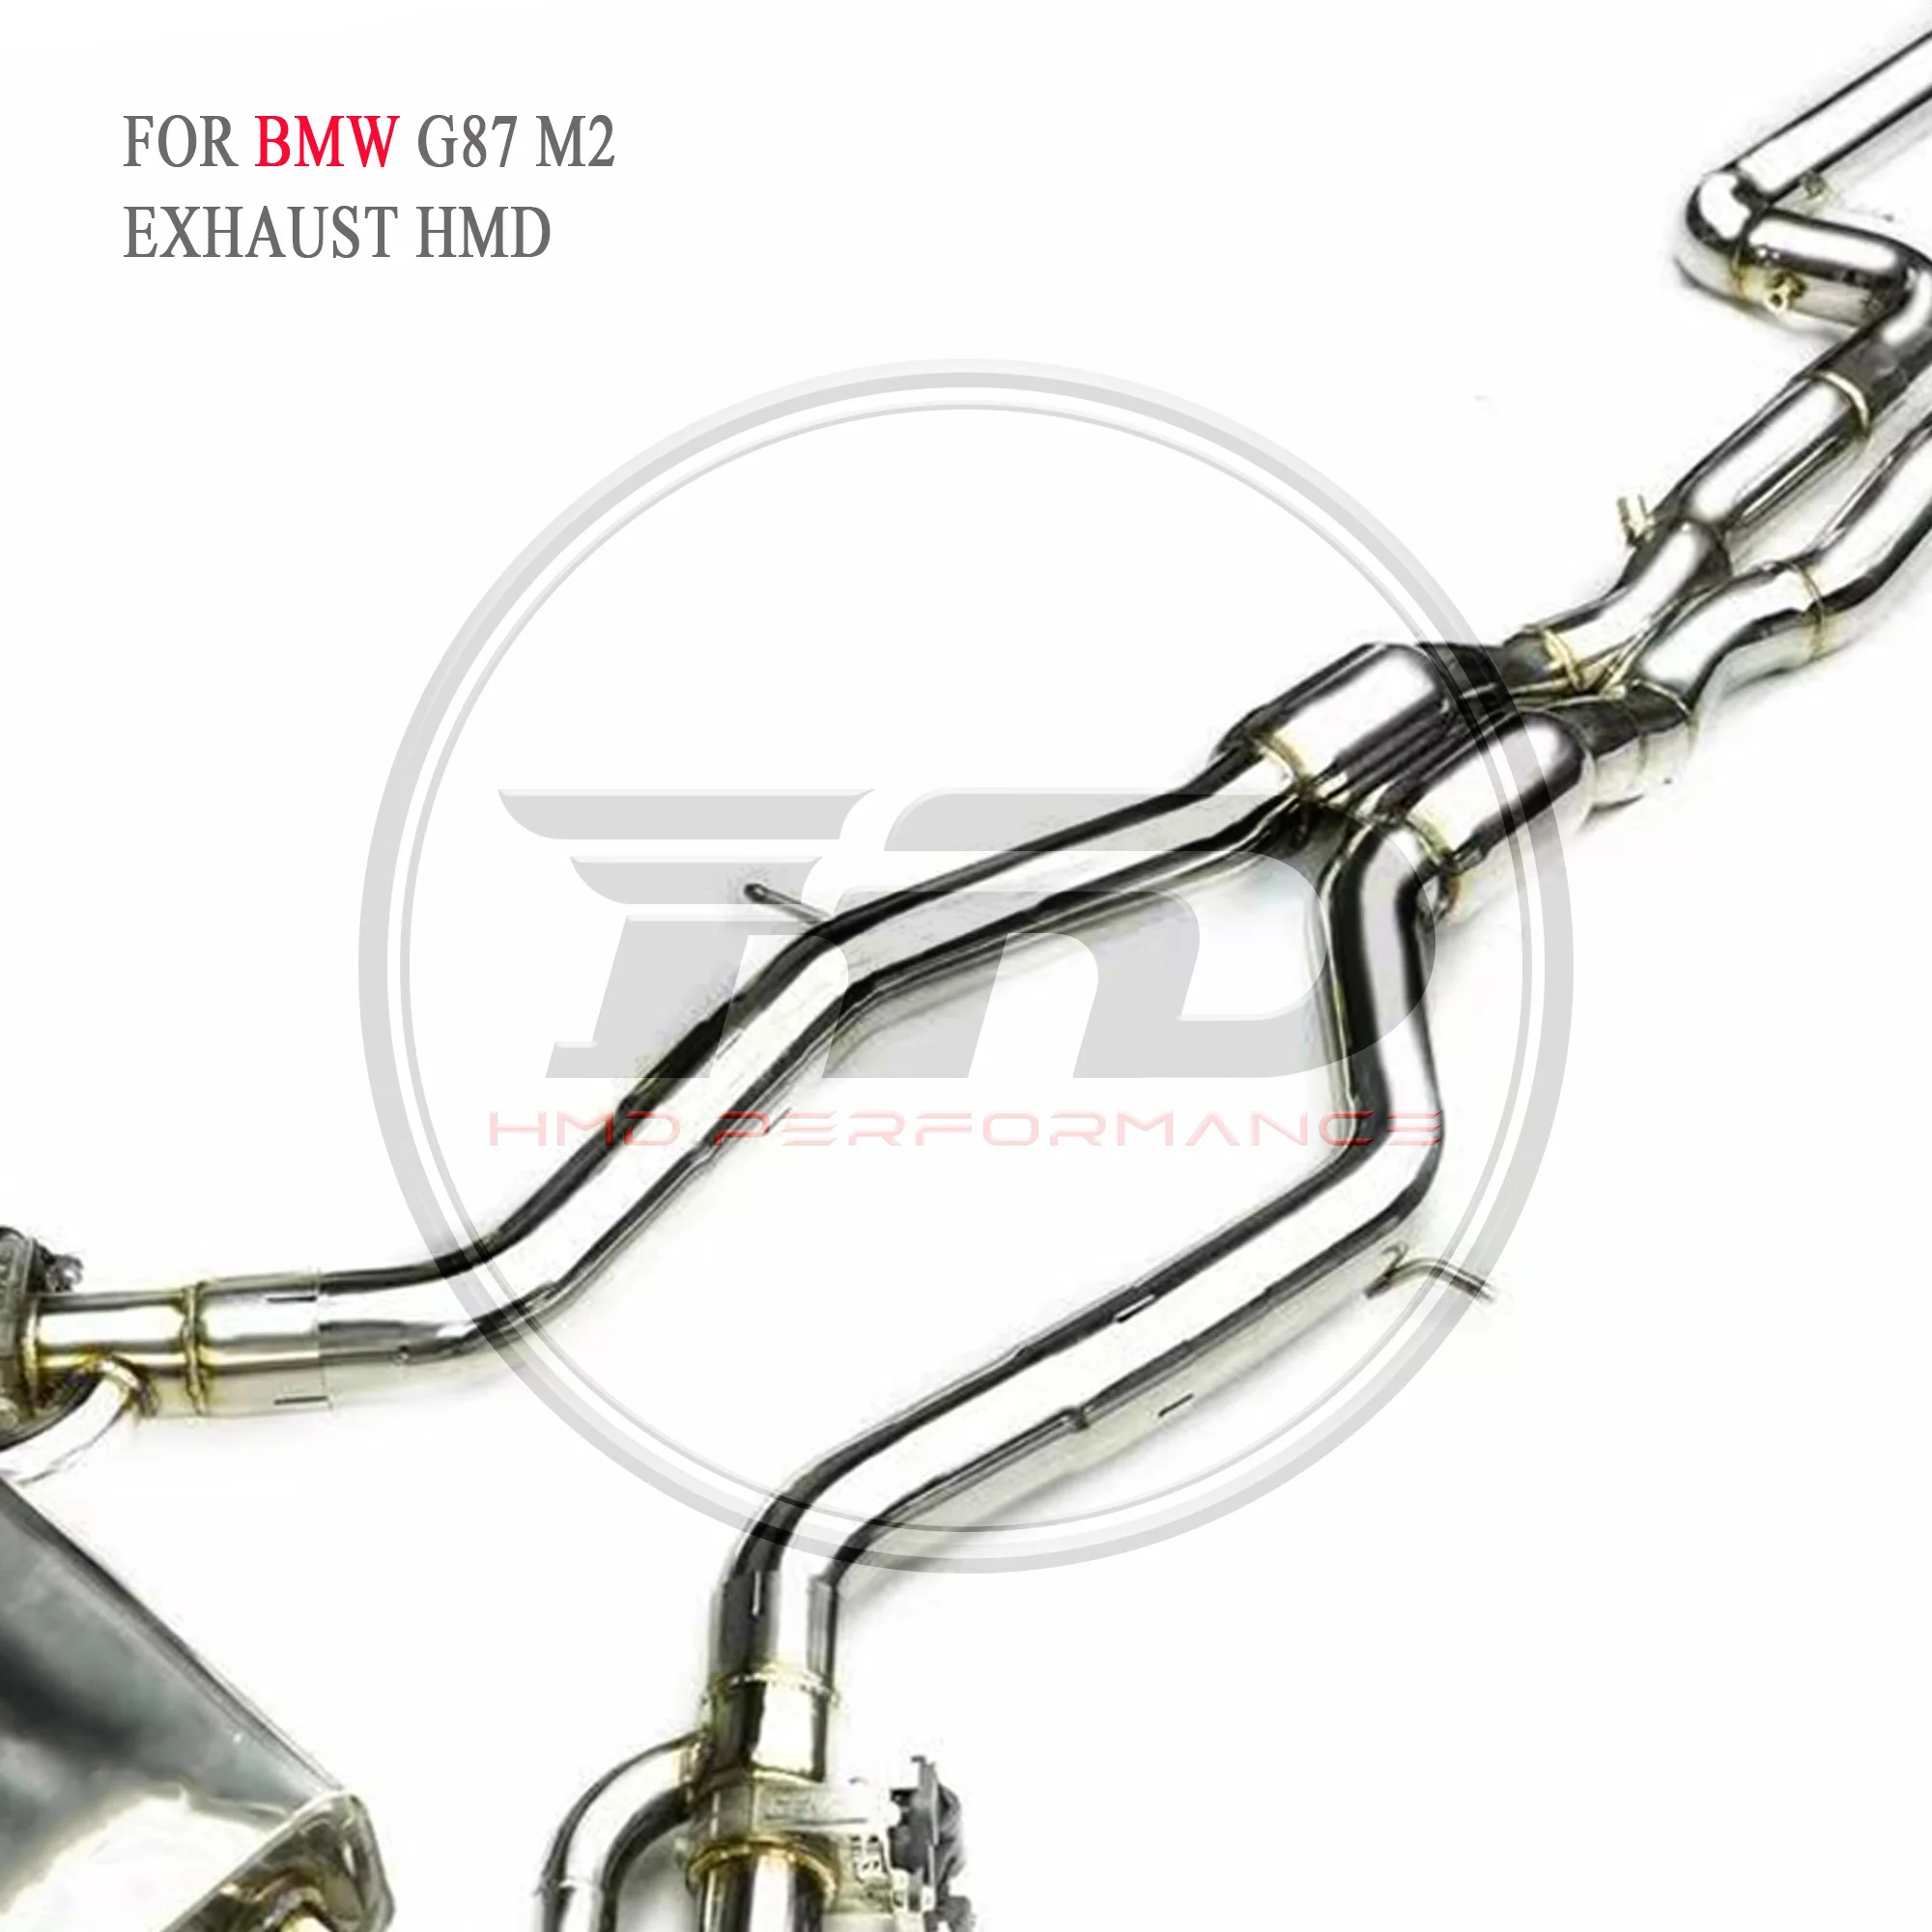 

HMD Exhaust System Stainless Steel Performance Catback for BMW M2 G87 3.0T 2022+ Muffler With Valve